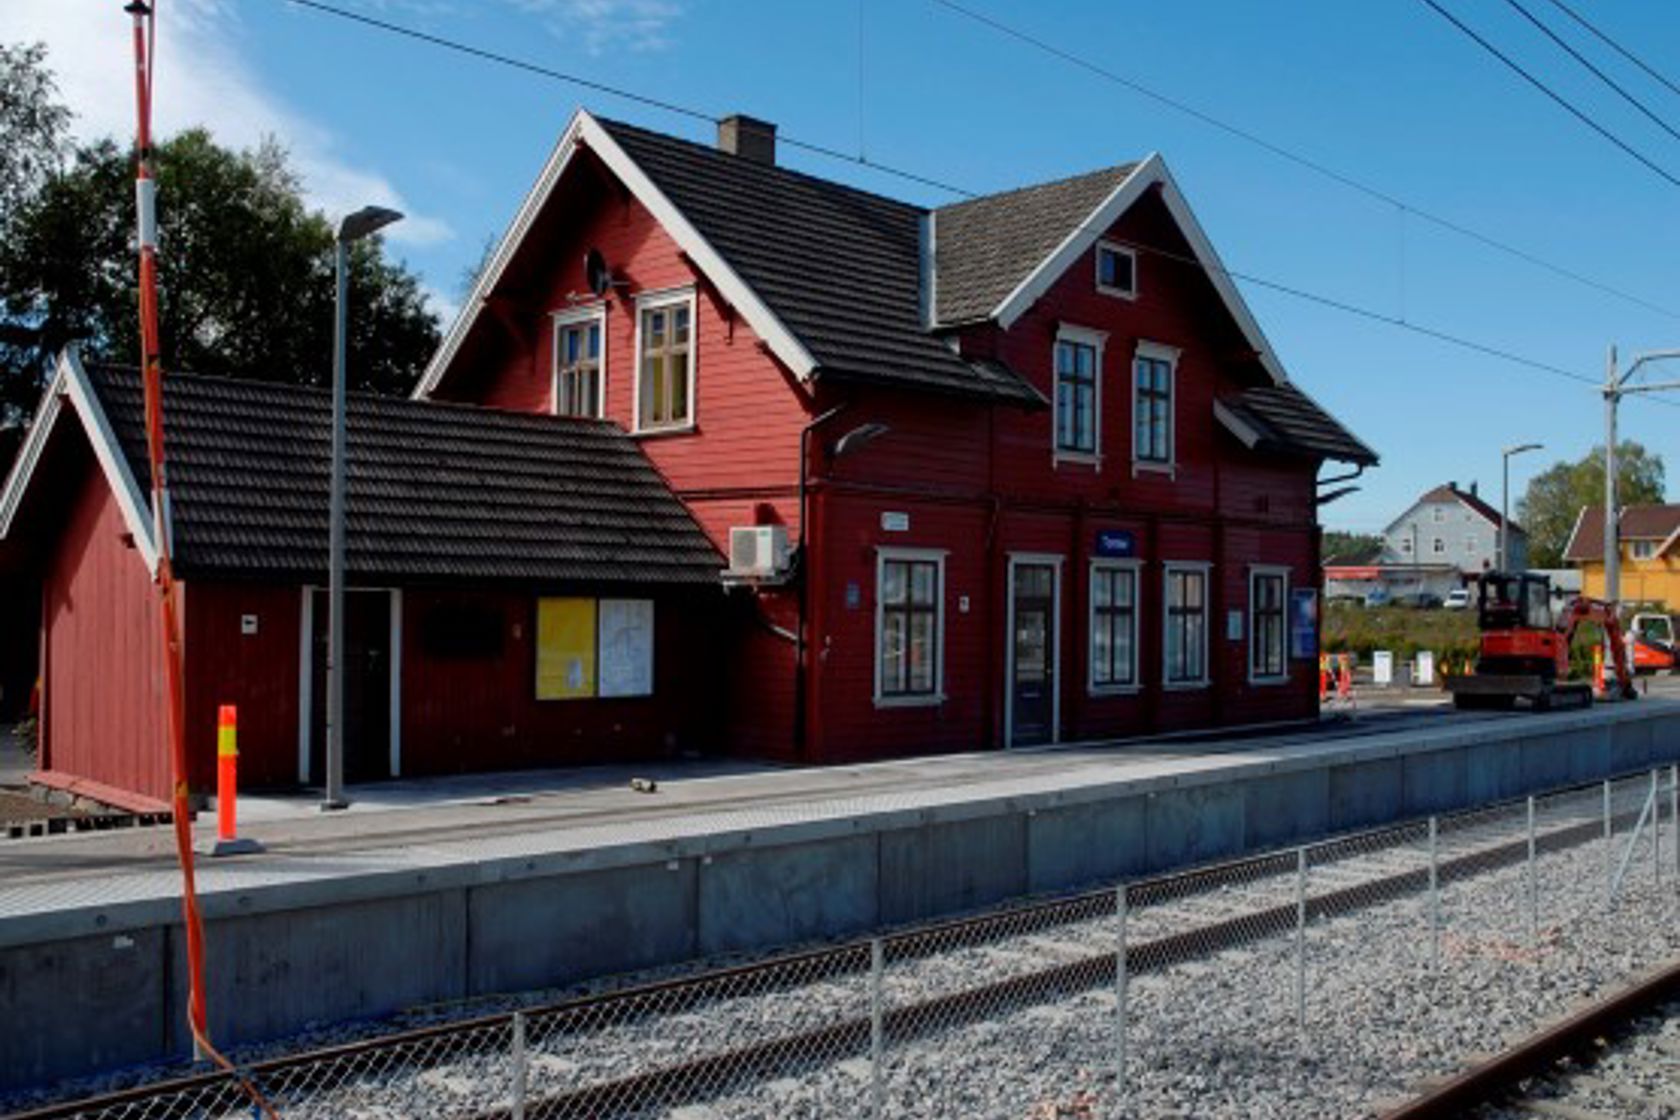 Exterior view of Tomter station